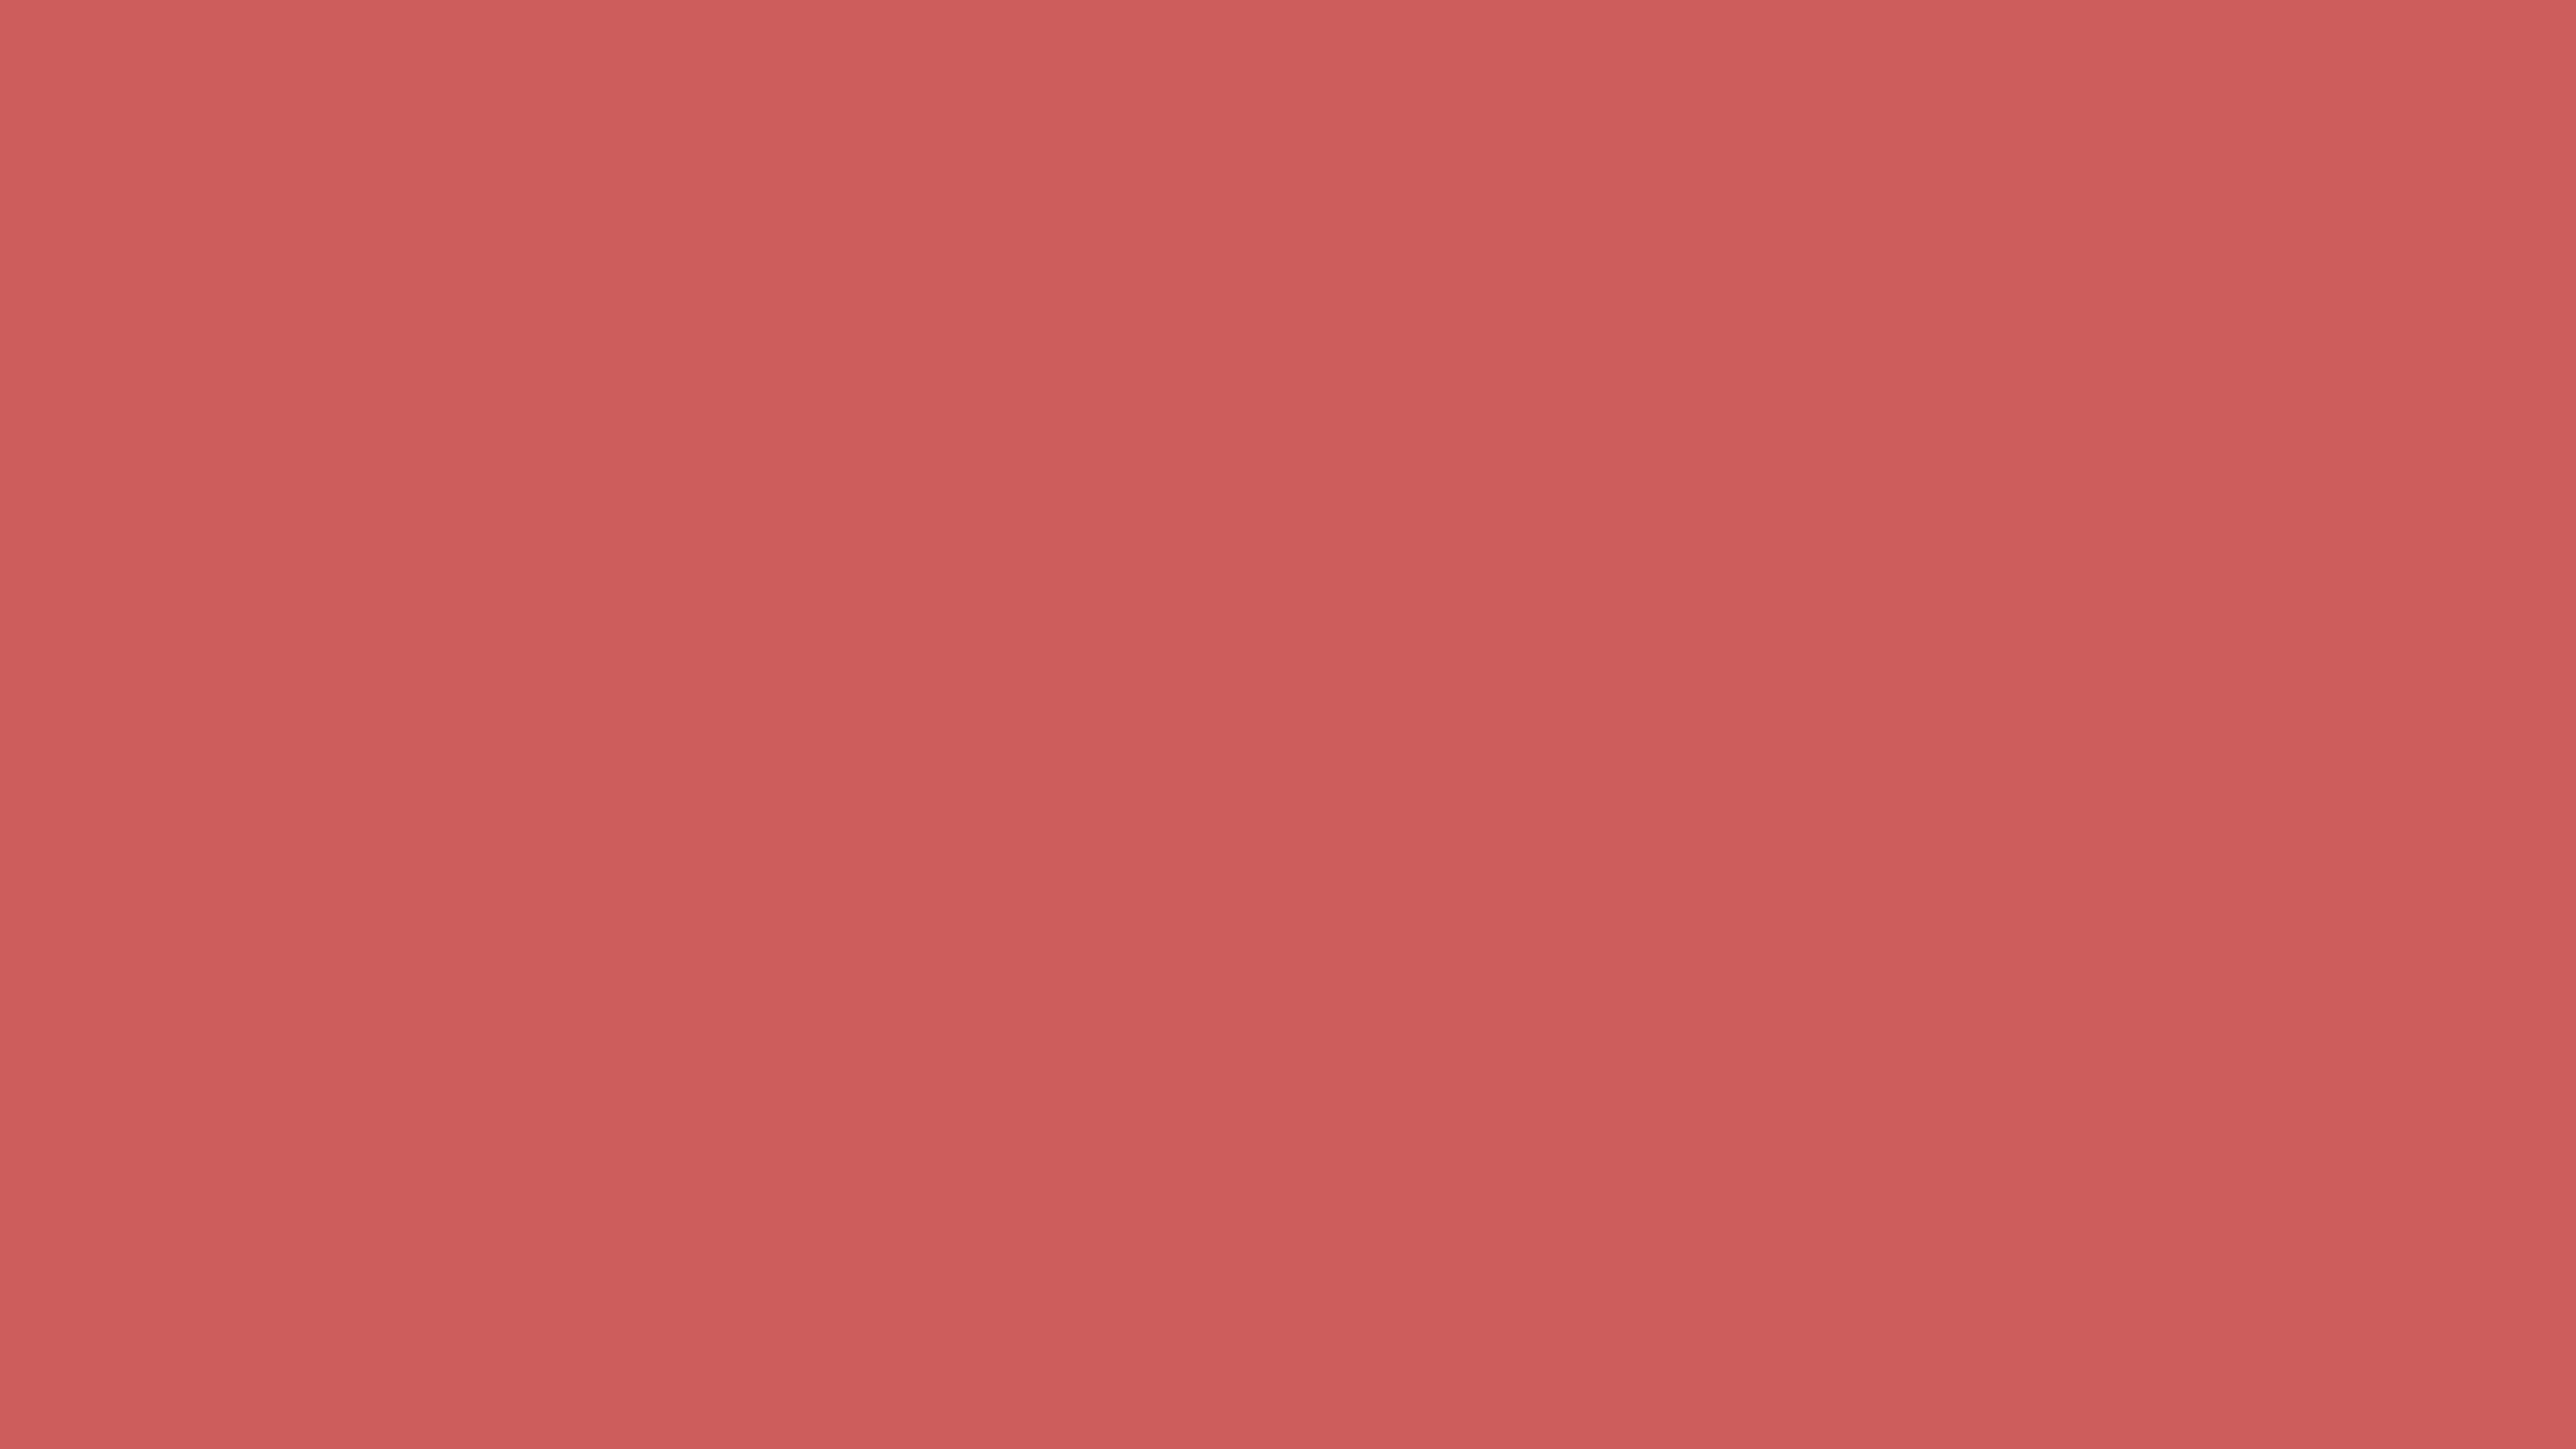 4096x2304 Indian Red Solid Color Background